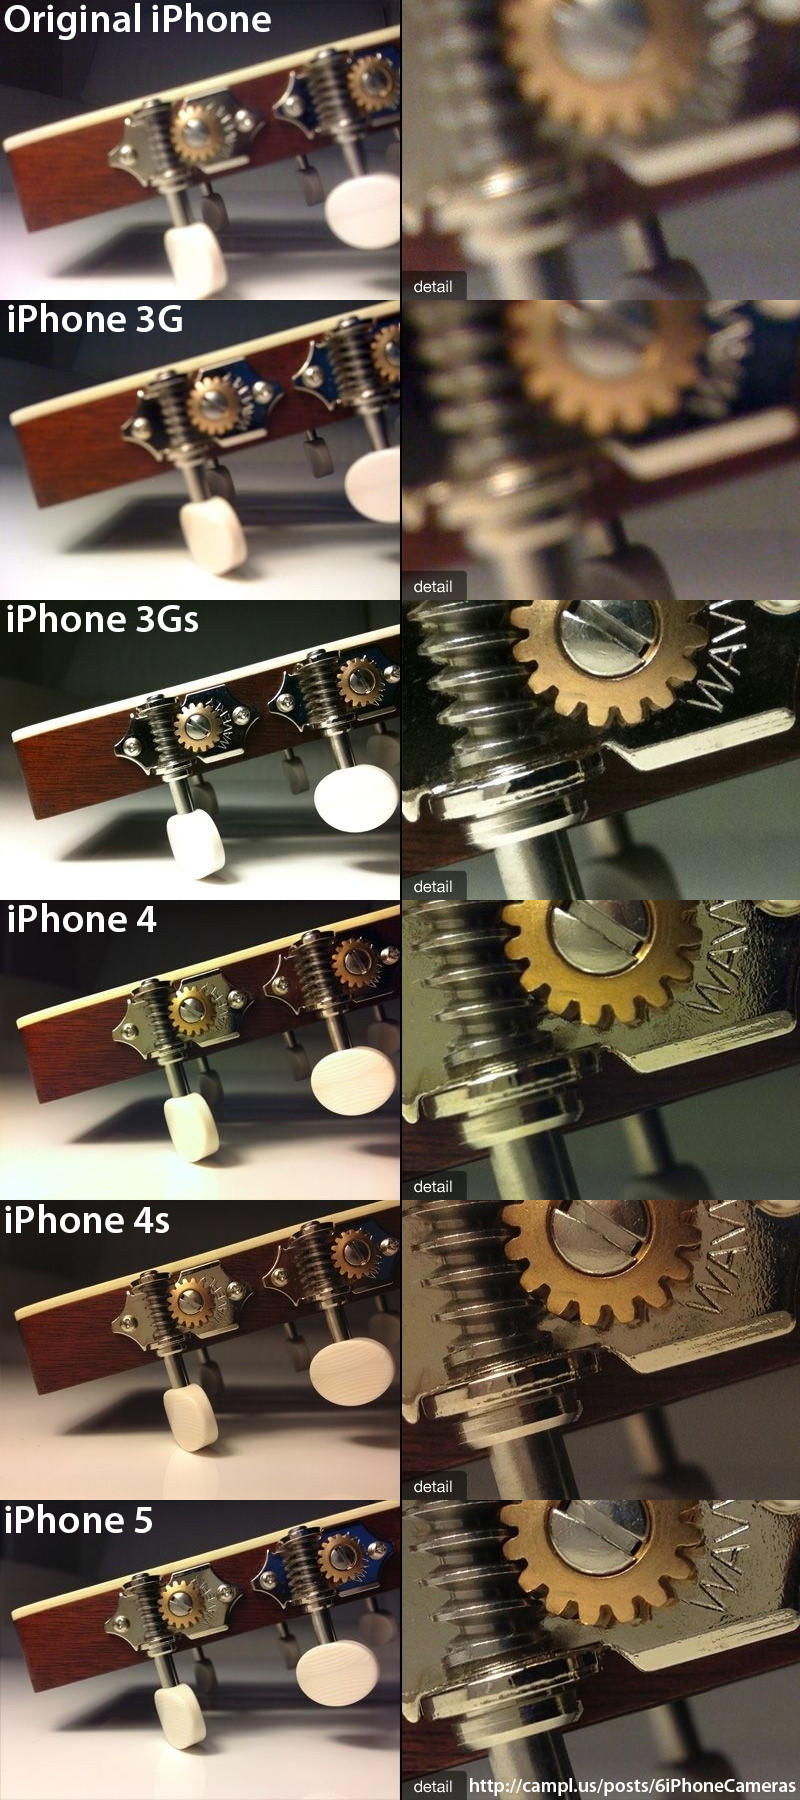 iphone guitar photo comparison - Comparison of photos from iPhone 2G to iPhone 5